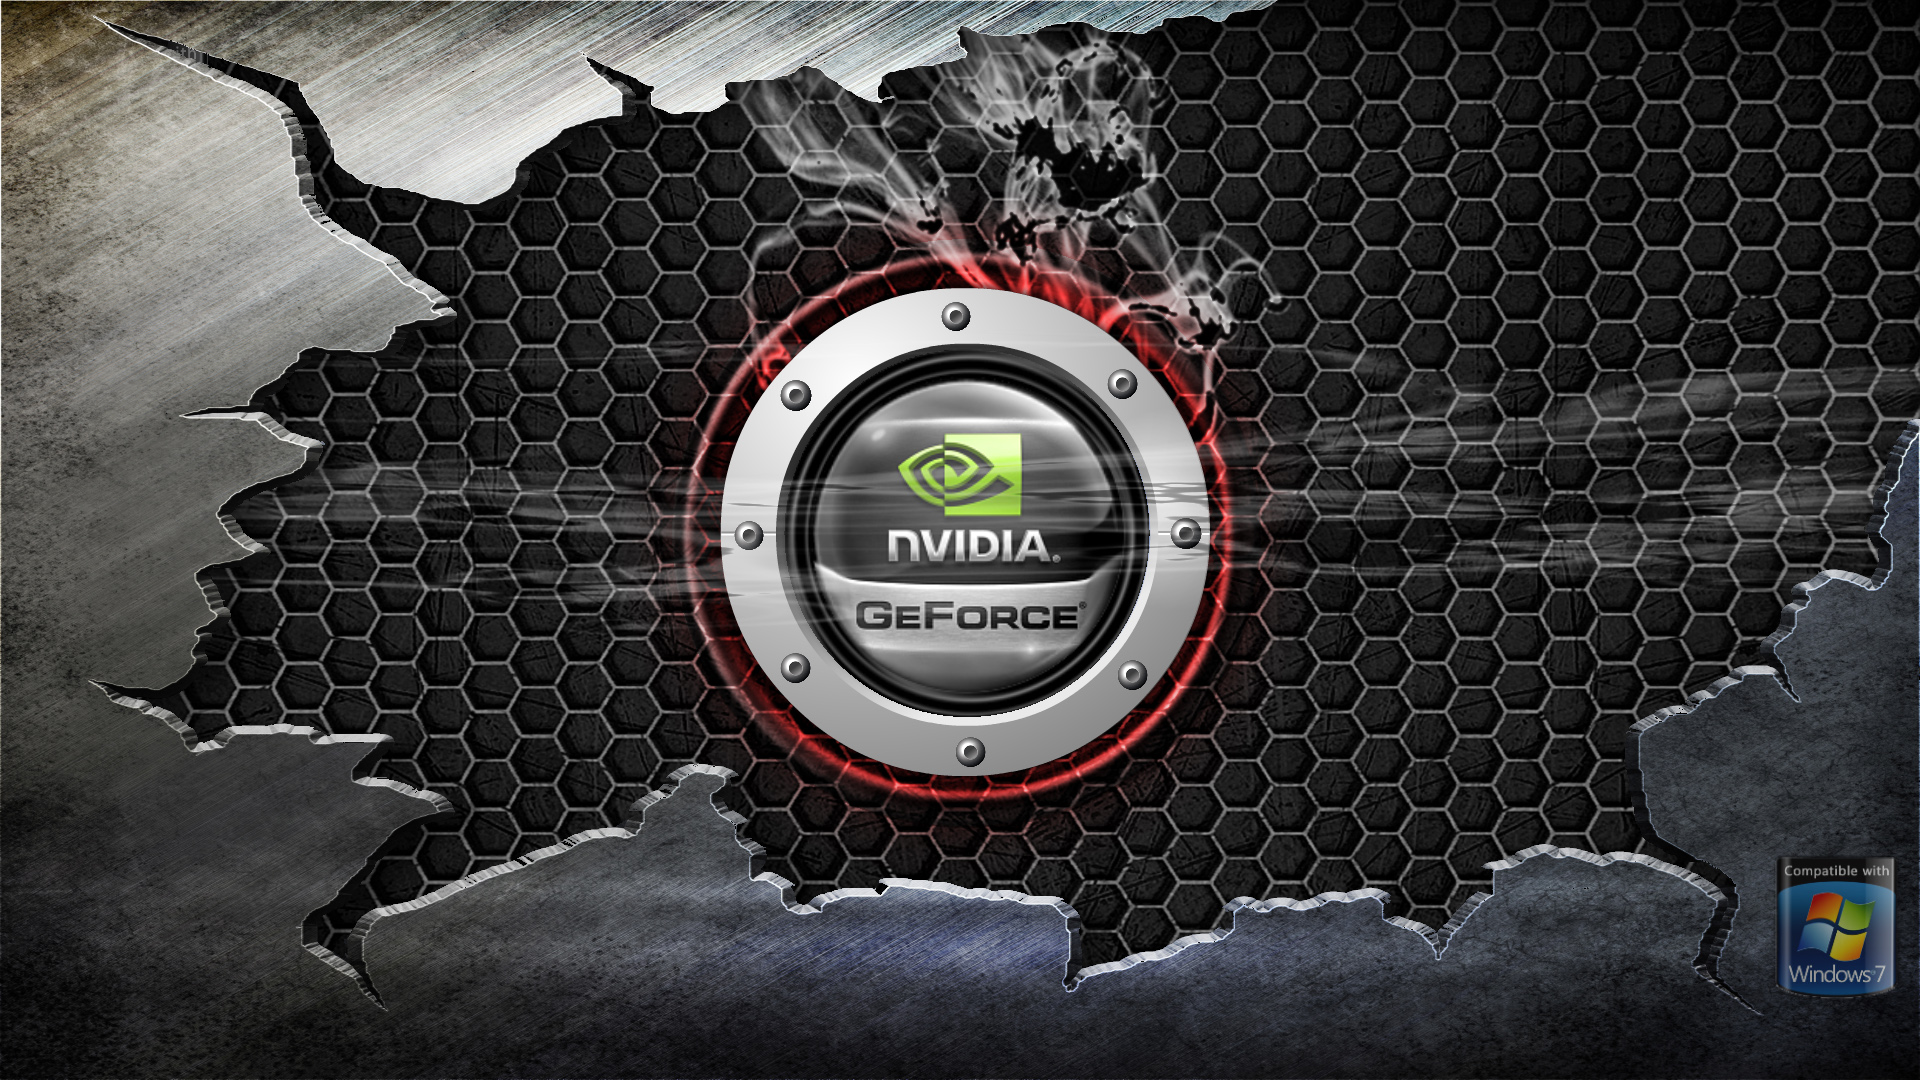 Nvidia Desktop Wallpaper - HD Wallpapers Backgrounds of Your Choice